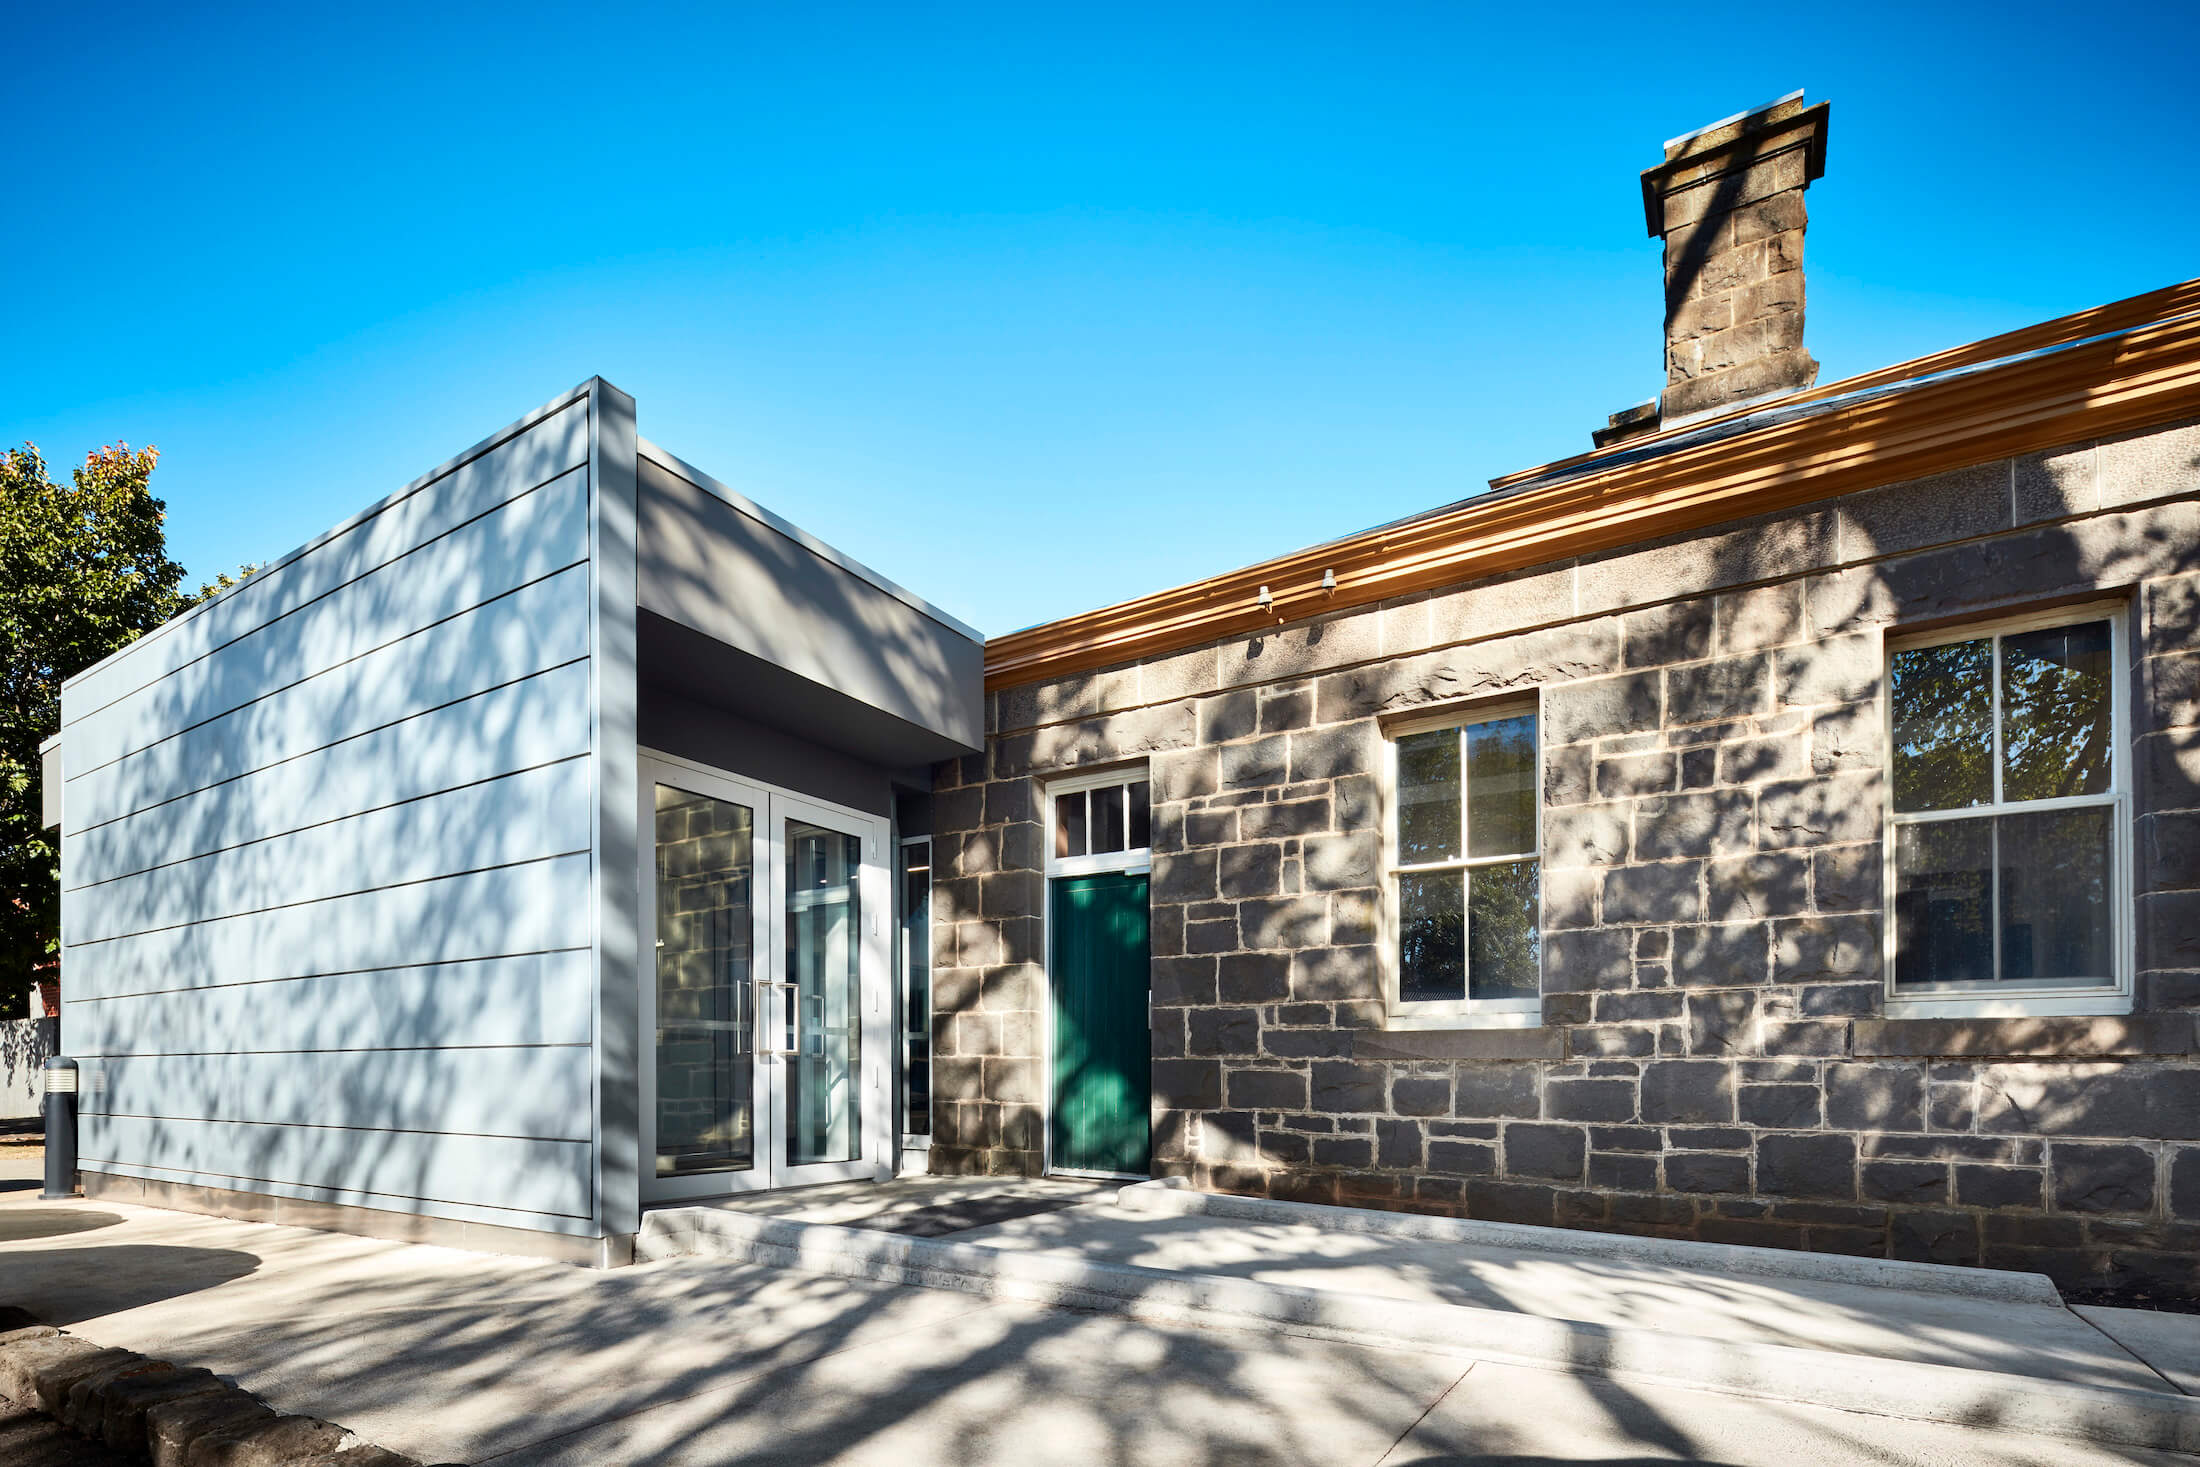 Bluestone heritage building with green door and contemporary addition with public entrance